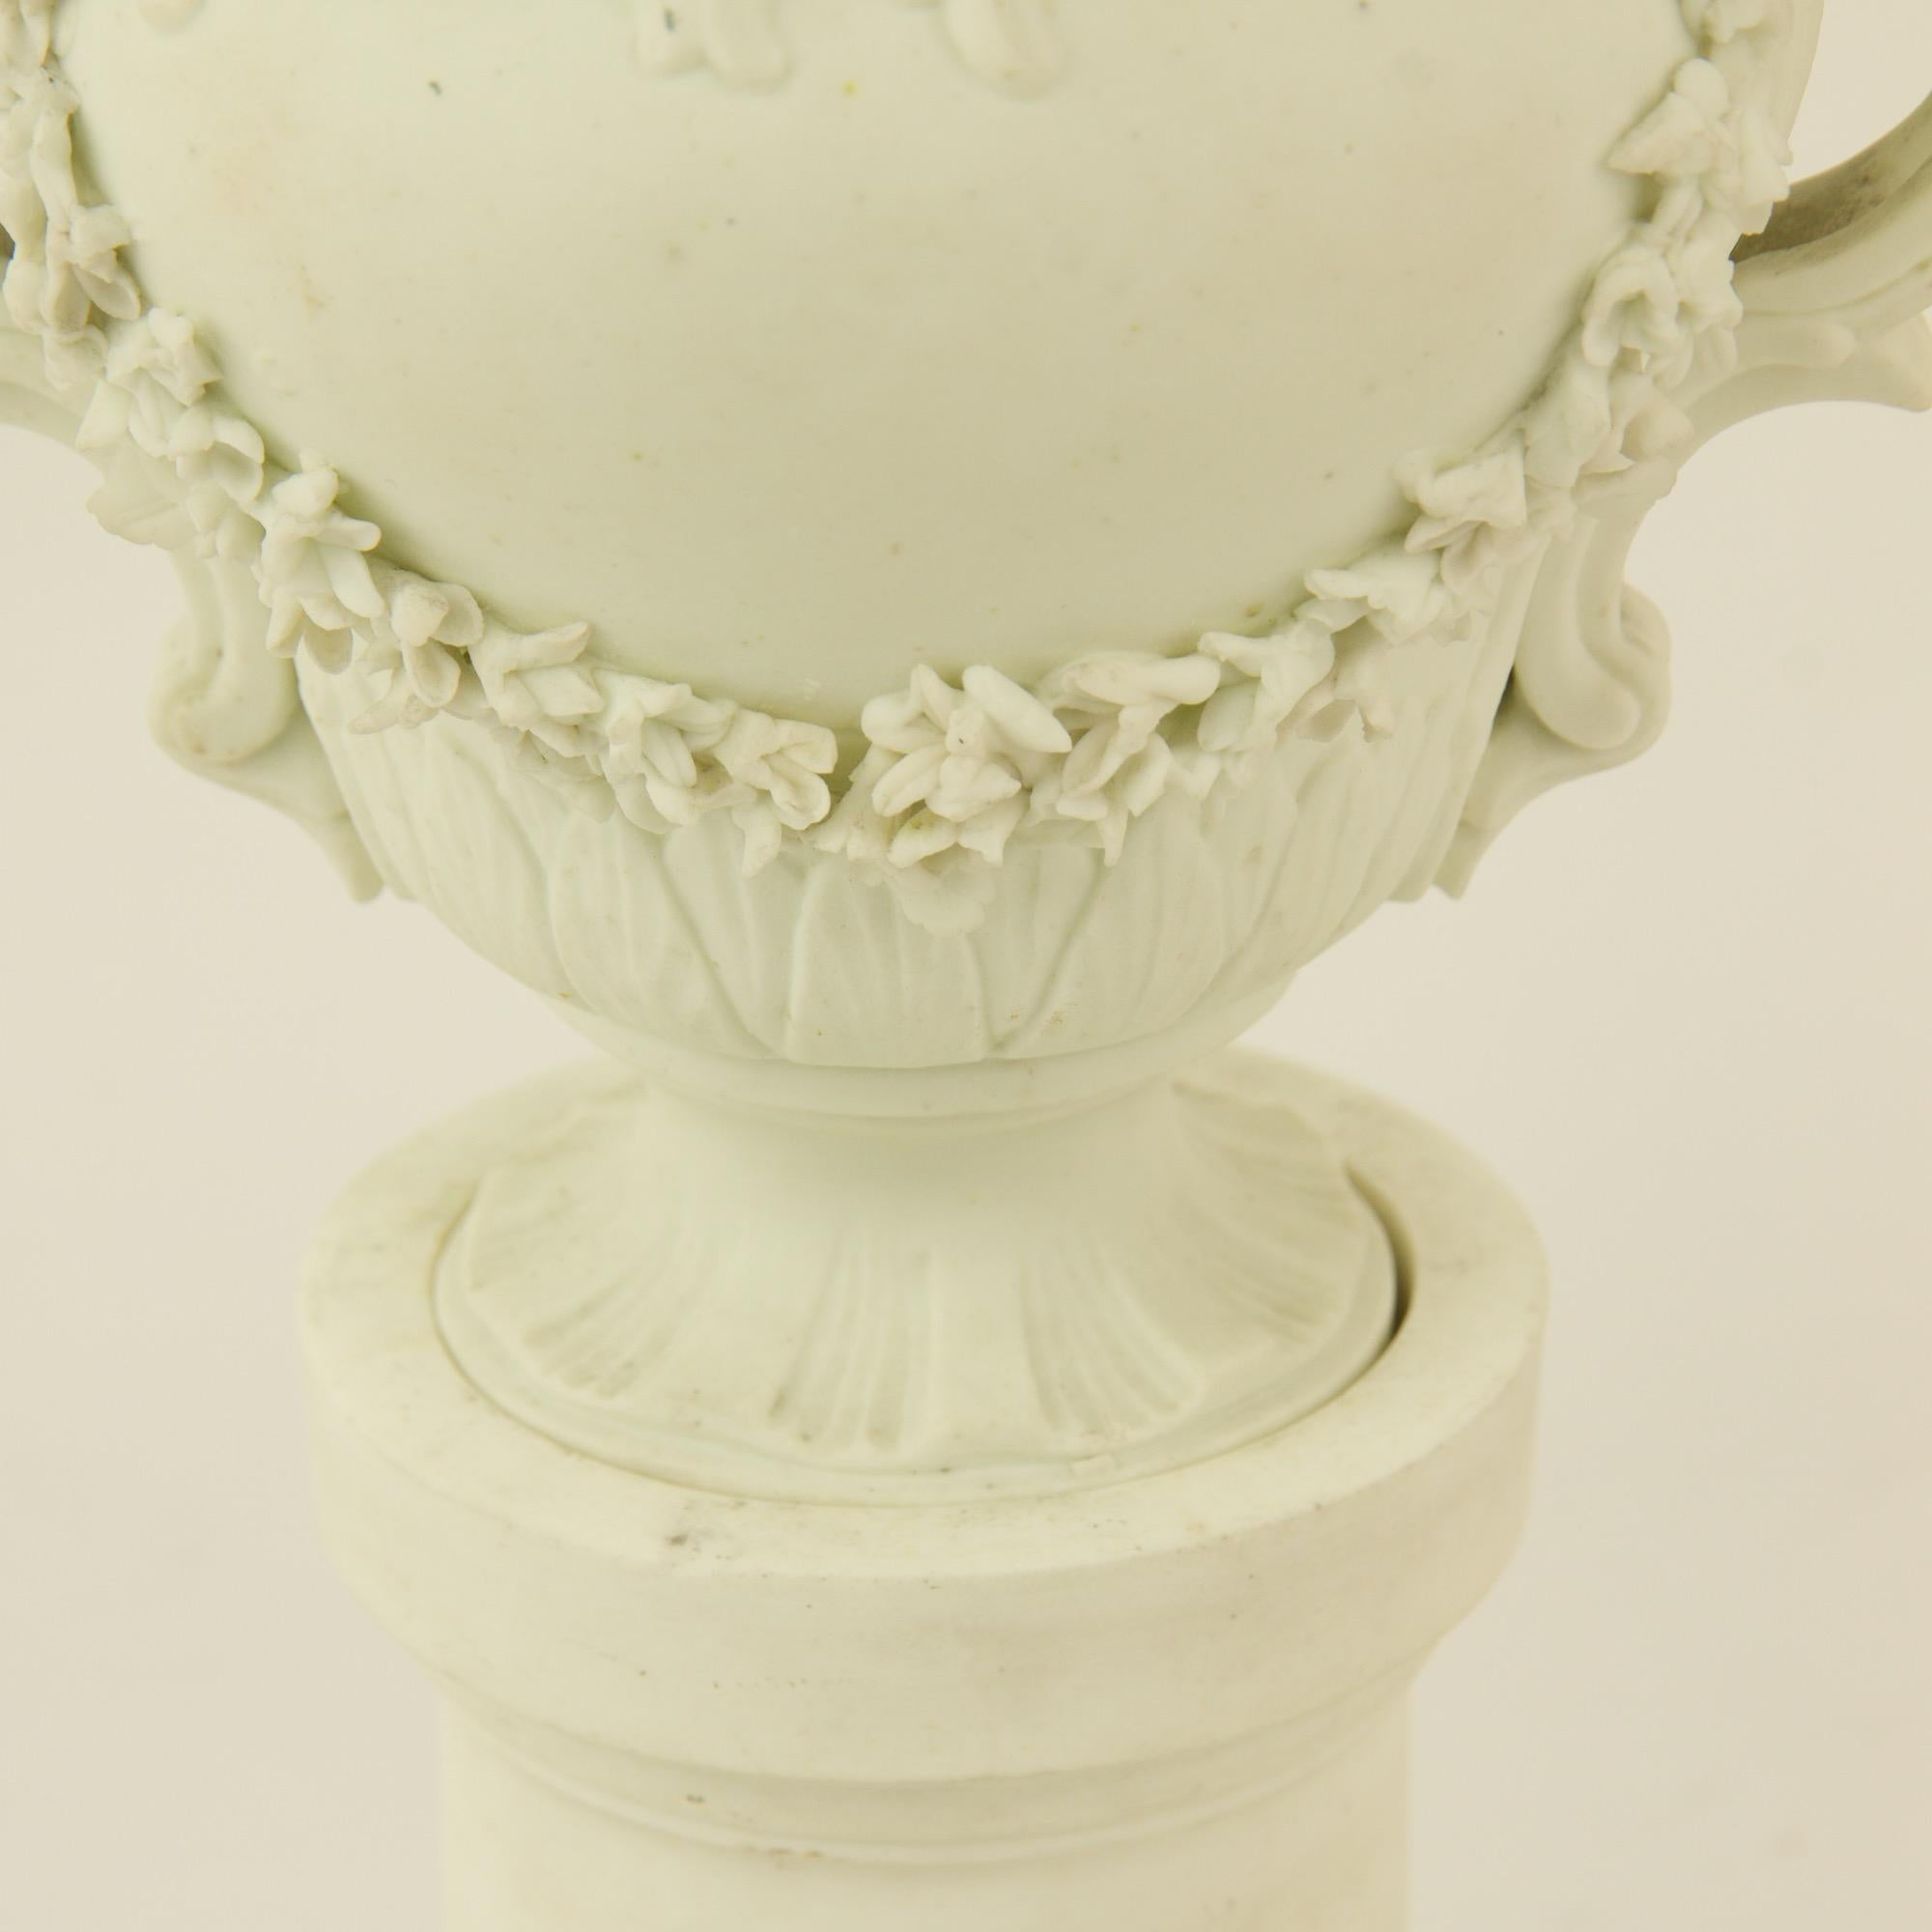 Pair of French Mid-18th Century Biscuit Porcelain Louis XV Vases and Pedestals For Sale 2